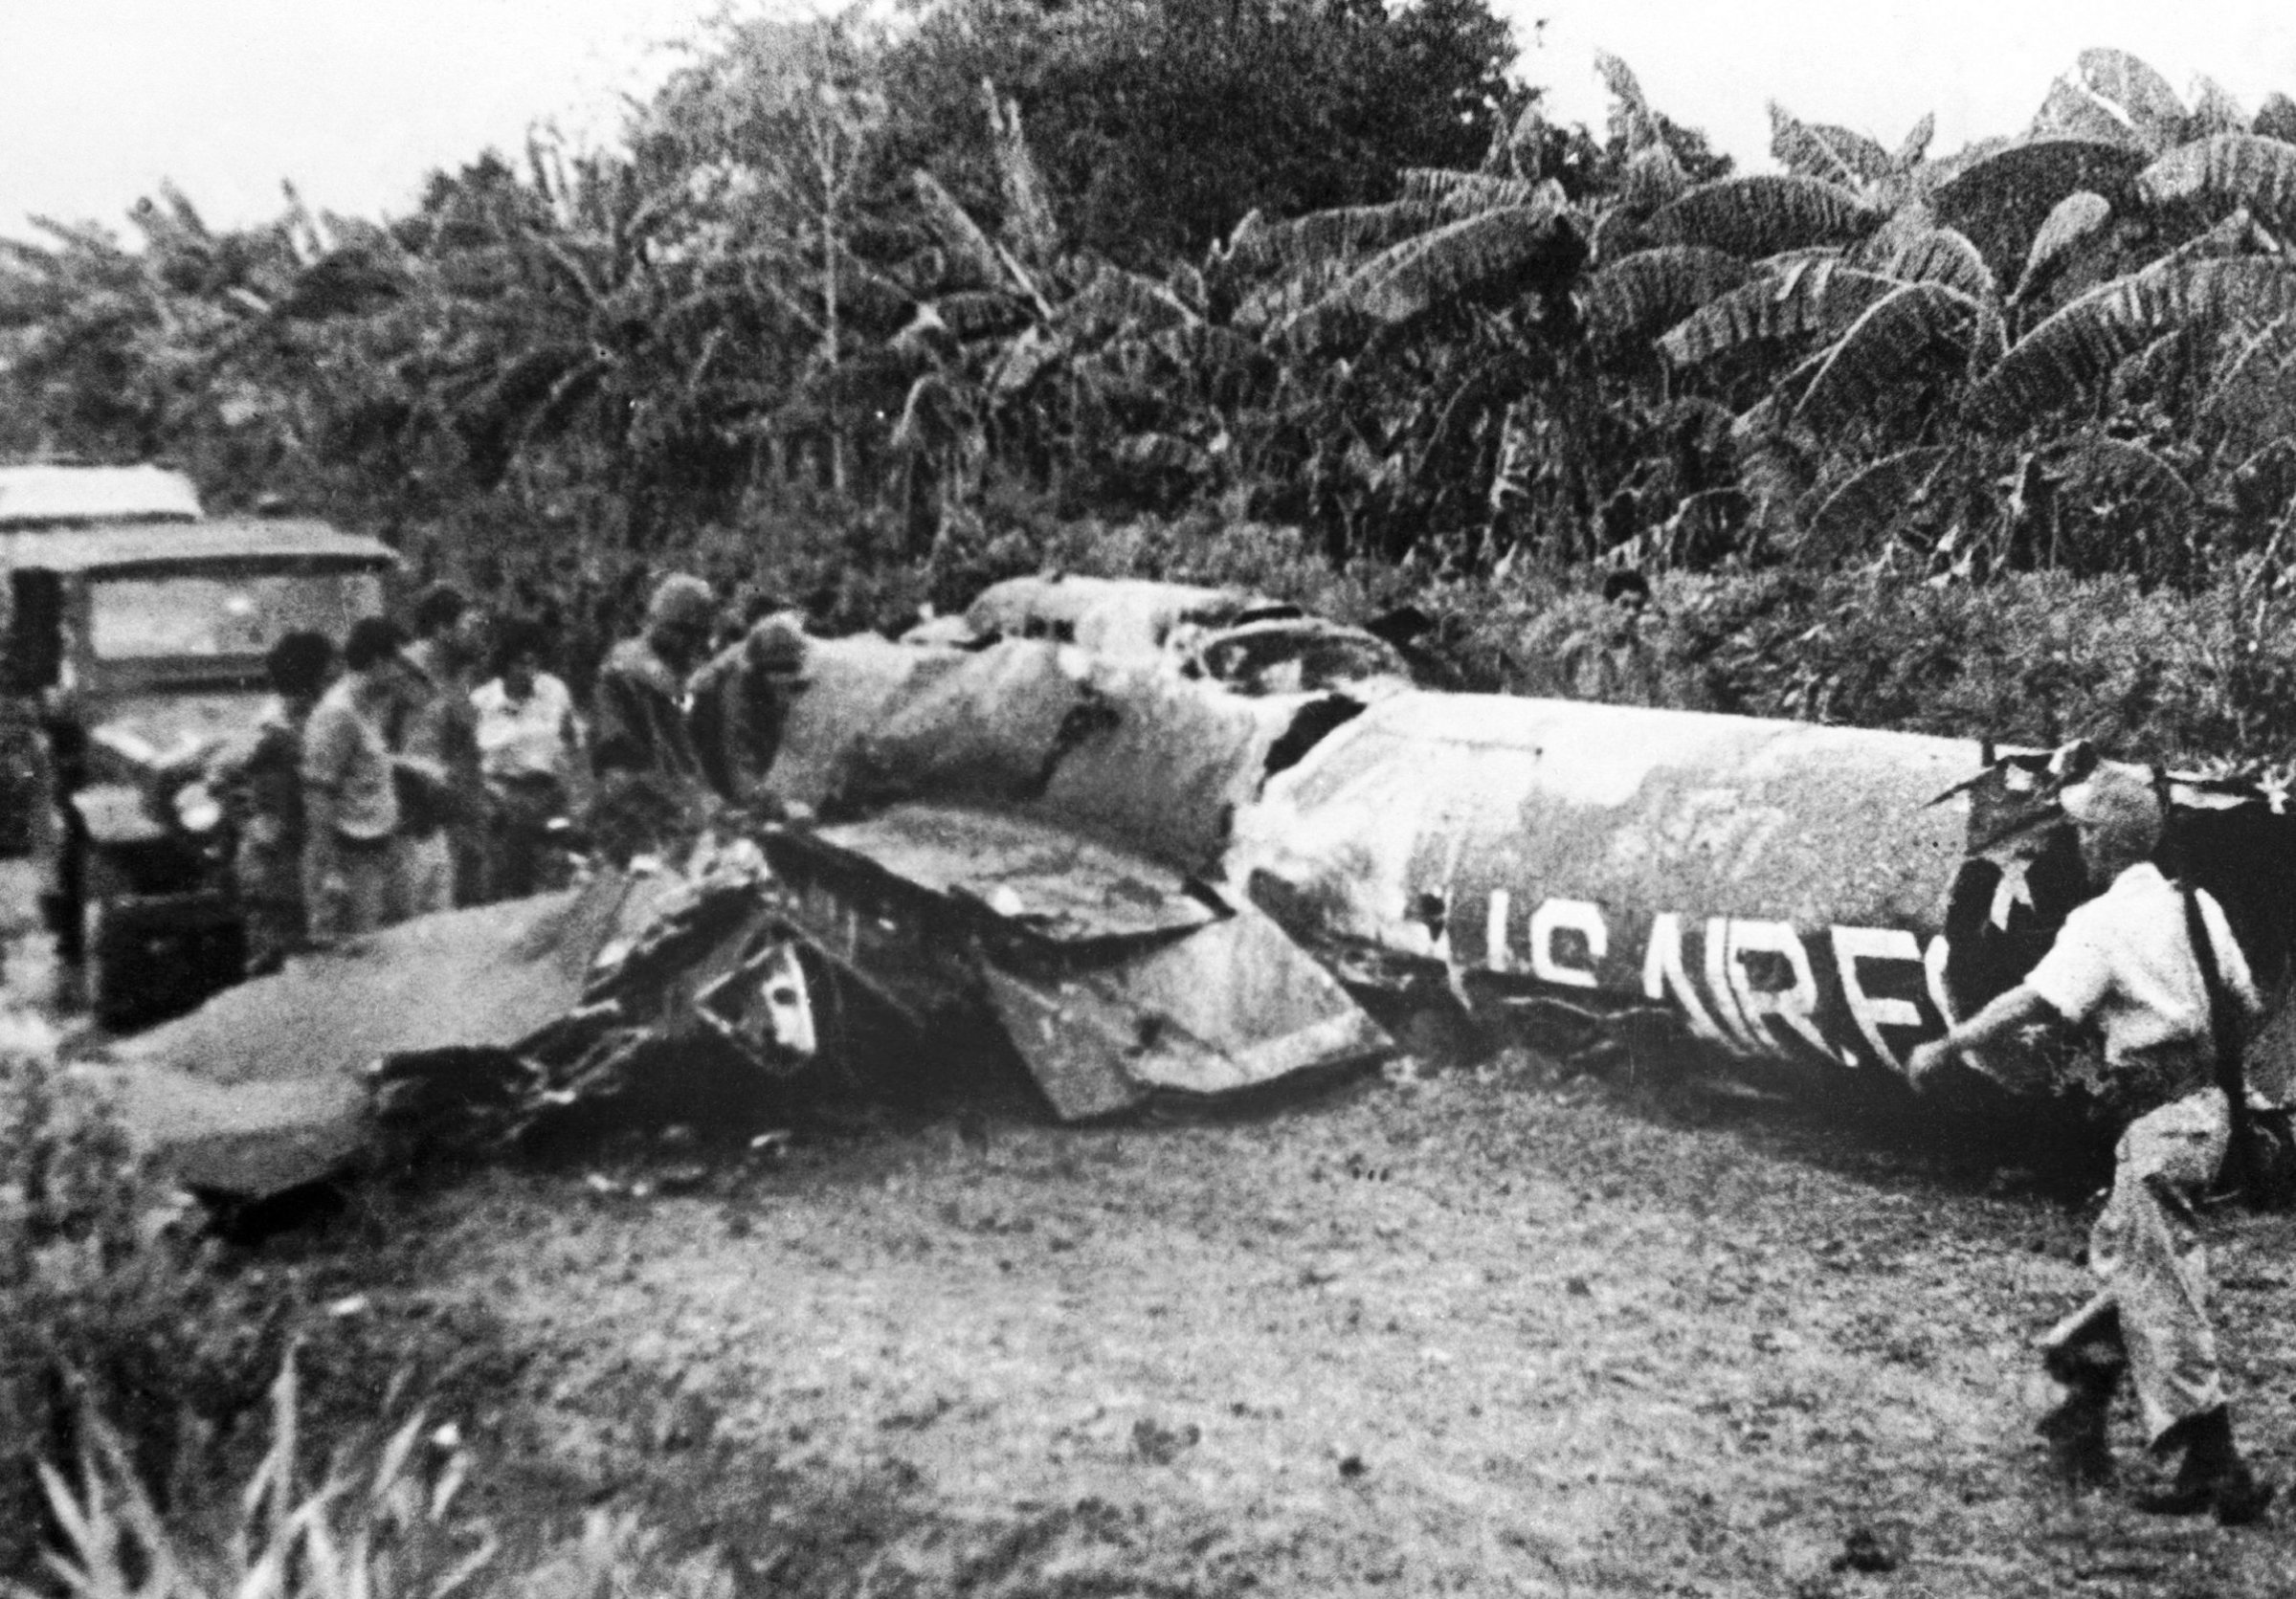 Cuban Missile Crisis Of 1962: The Debris Of An American Airplane